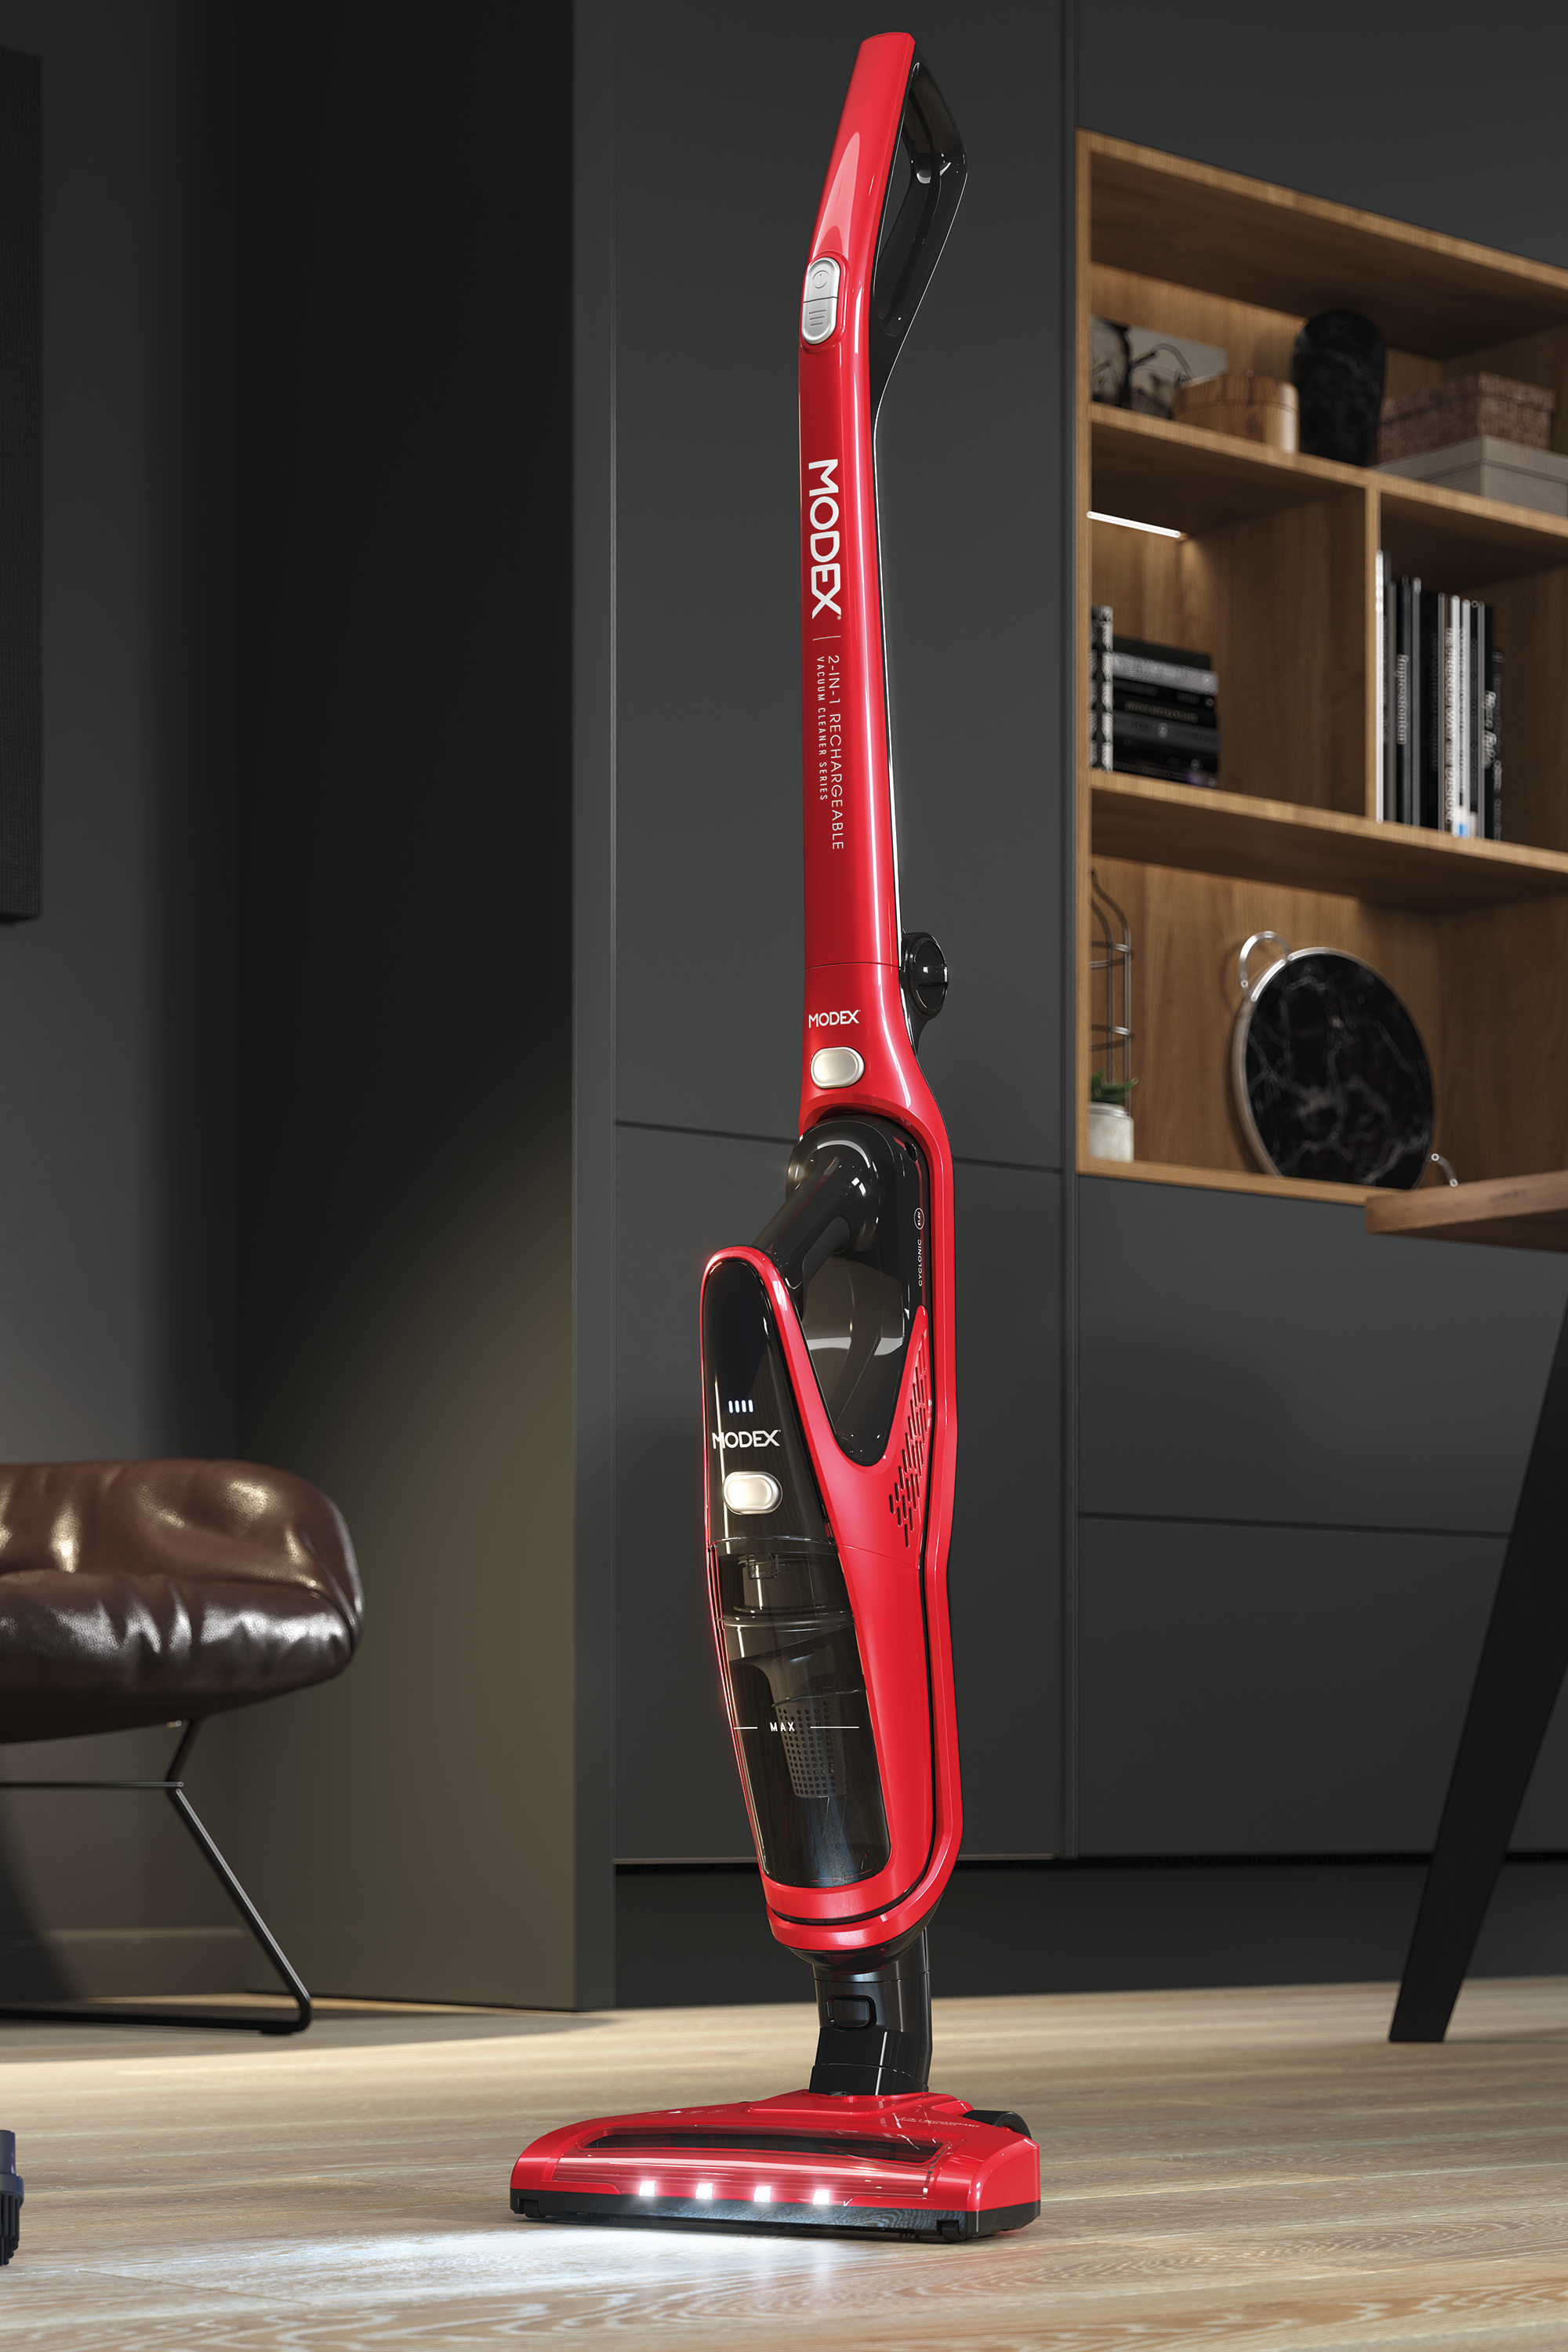 Hvc1300 Chargeable Vacuum Cleaner